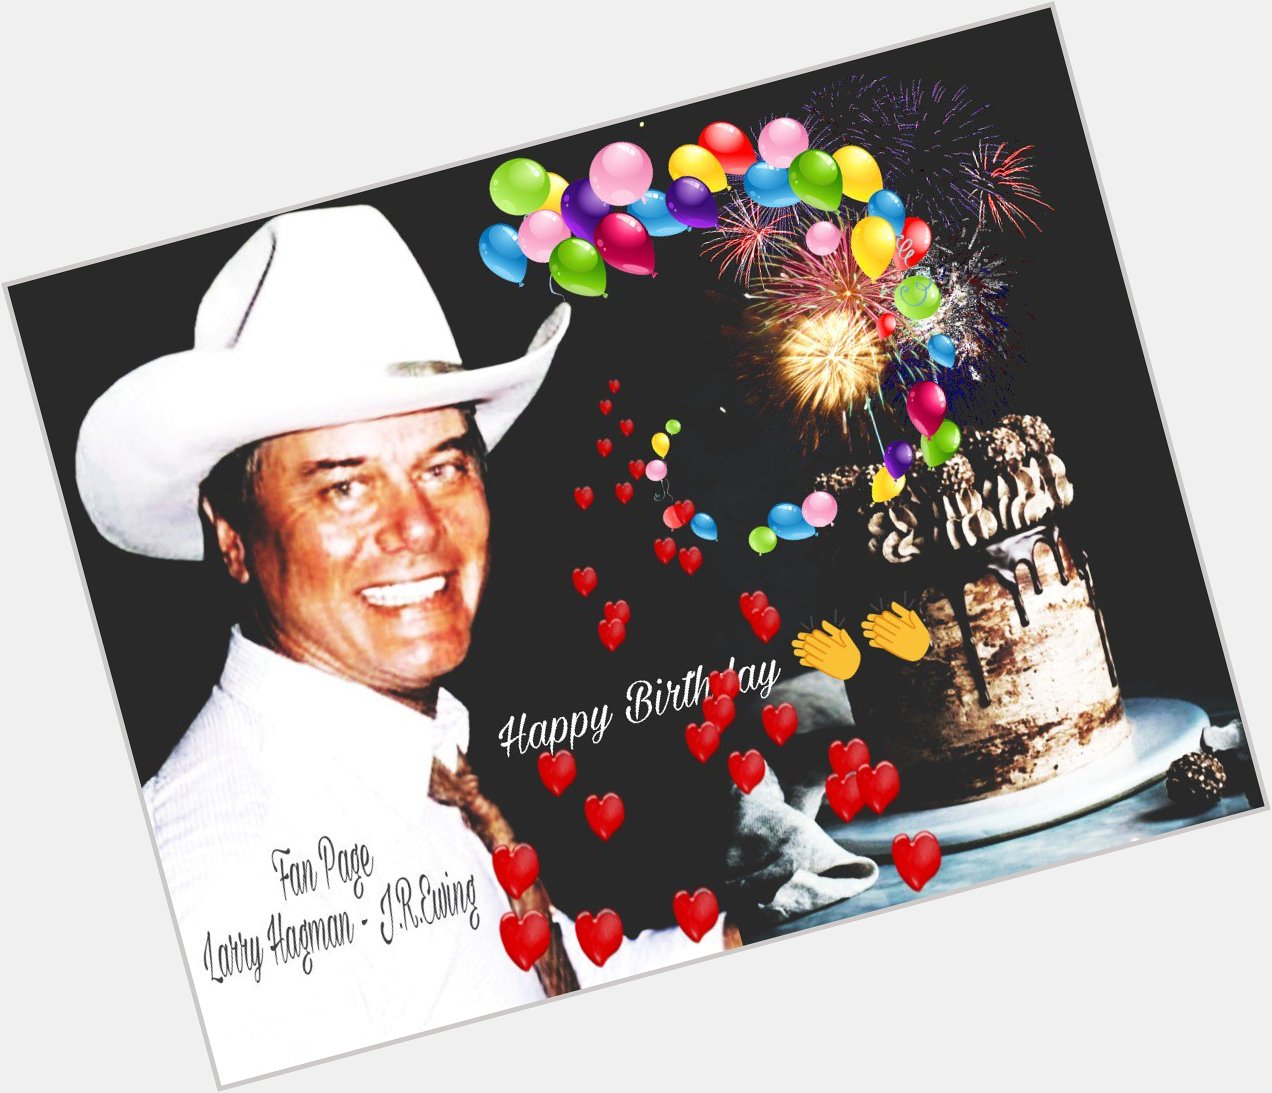 There is a party in the sky today!
Happy Birthday Larry Hagman!!! 